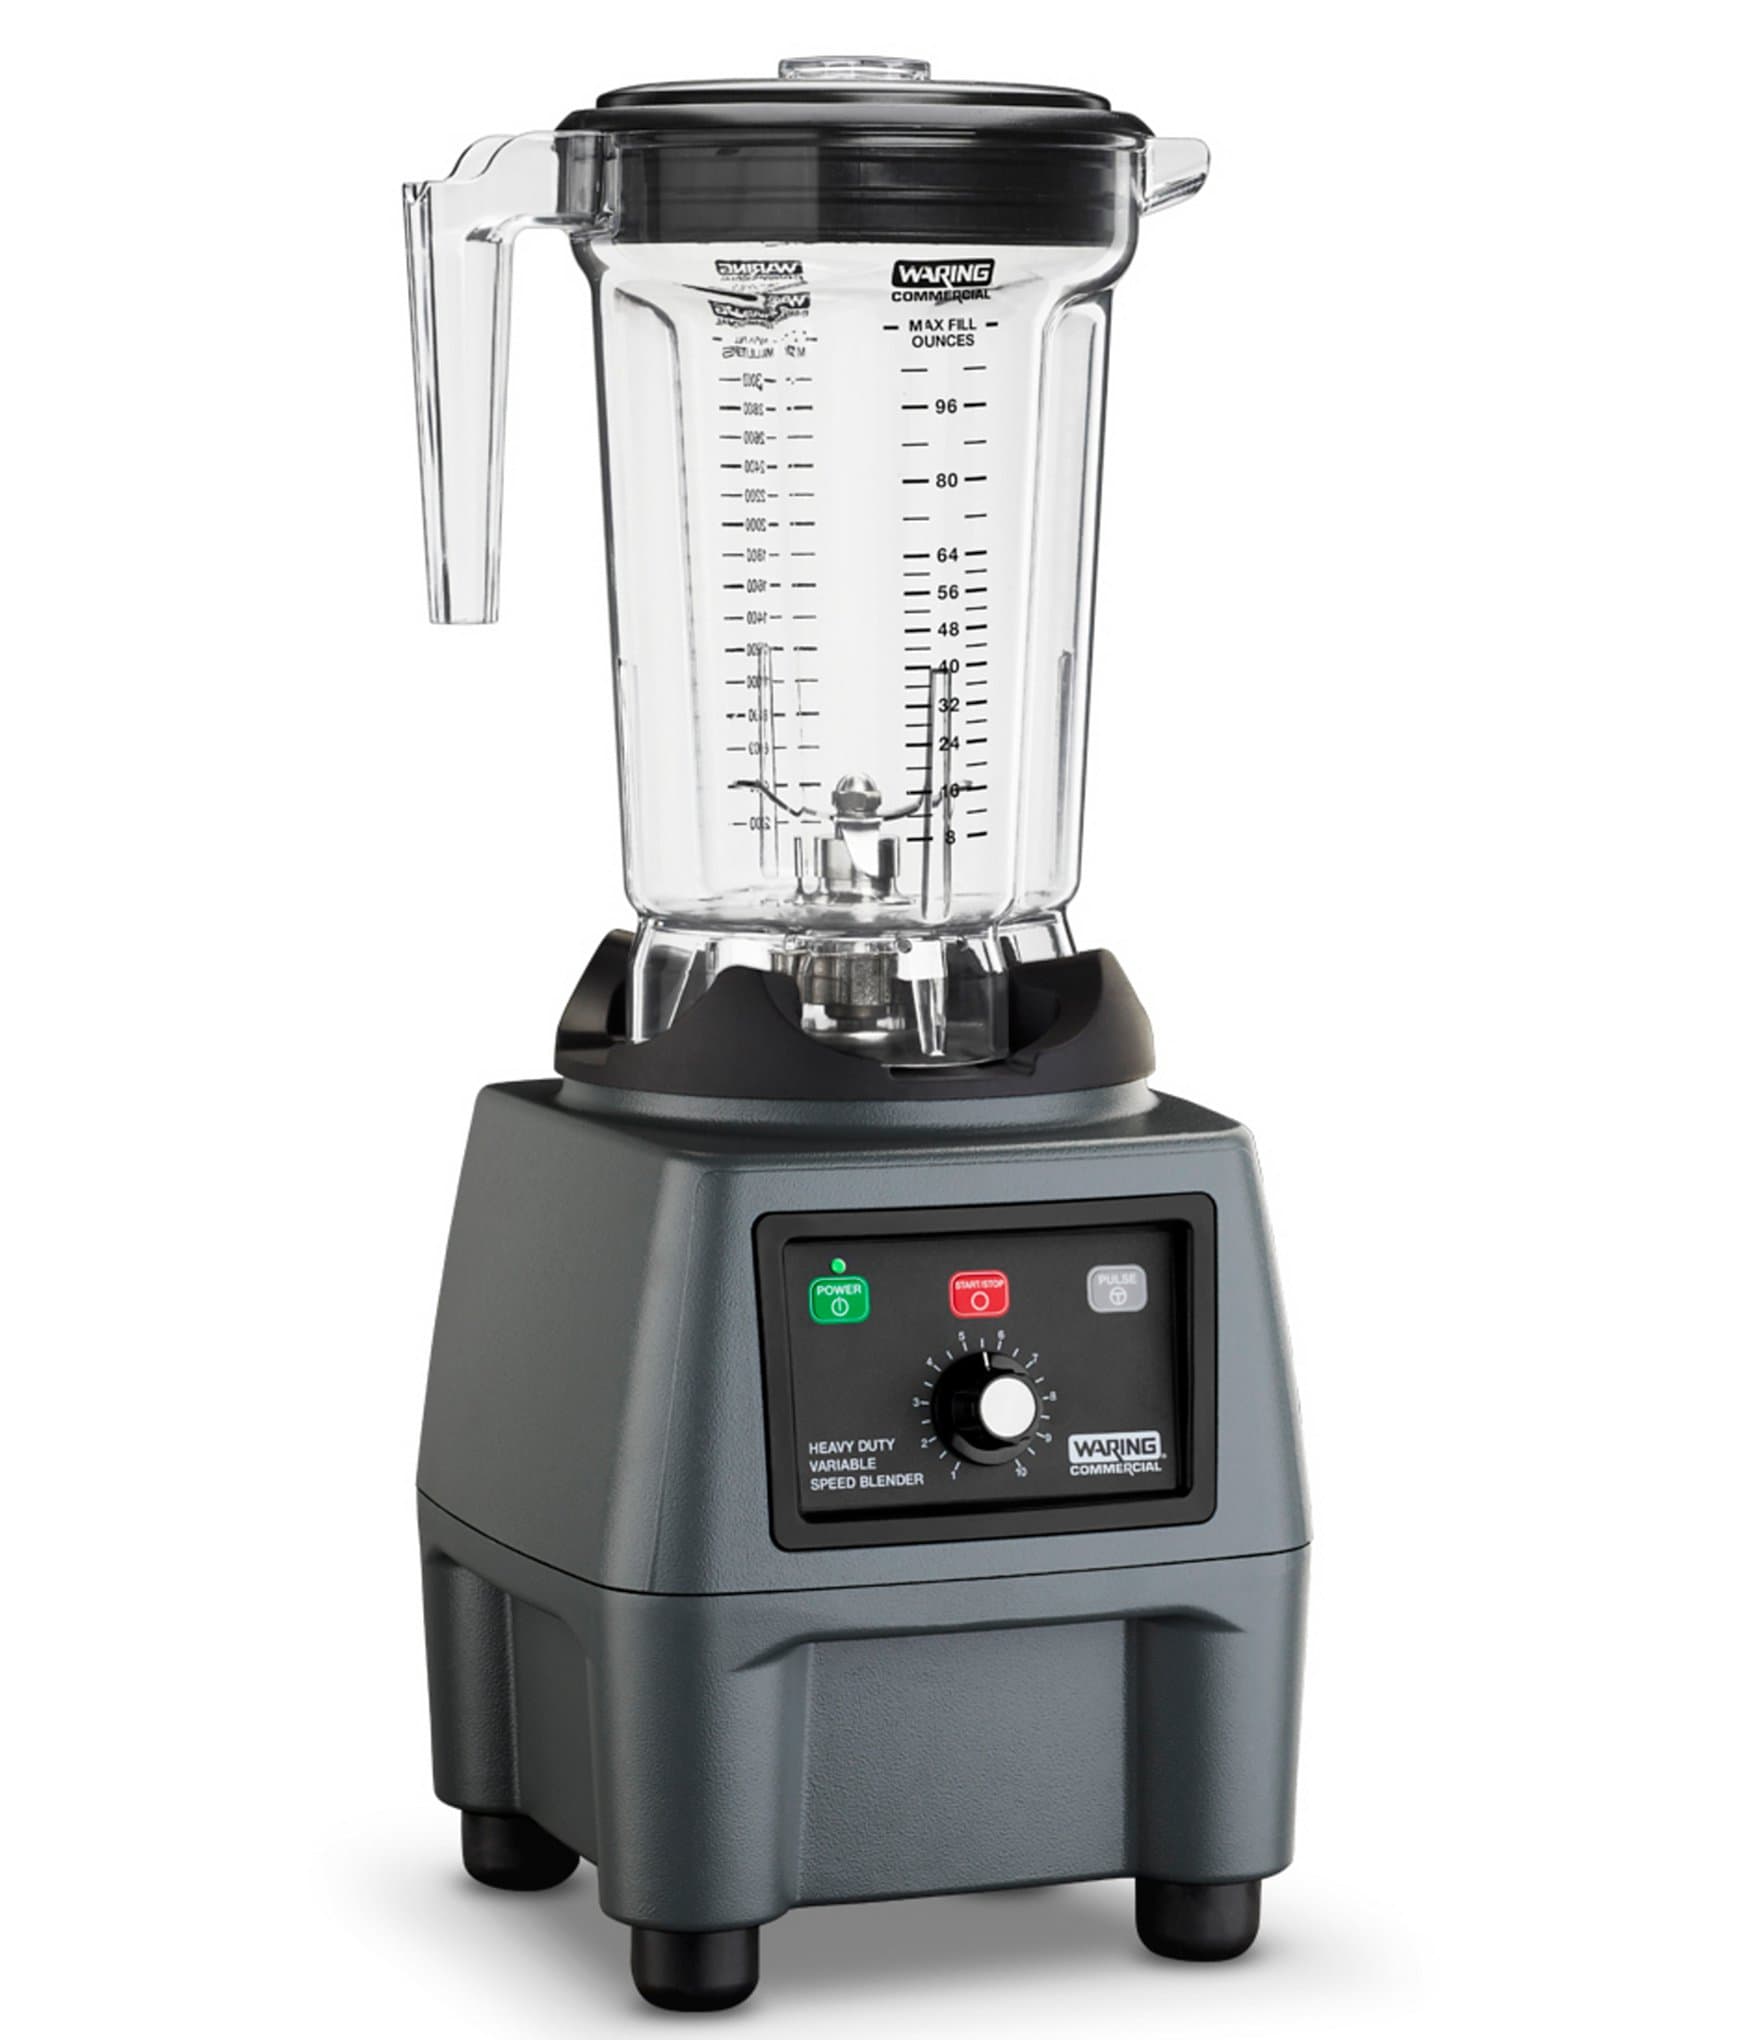 https://dimg.dillards.com/is/image/DillardsZoom/zoom/waring--1-gallon-variable-speed-food-blender-with-copolyester-container/20121079_zi.jpg